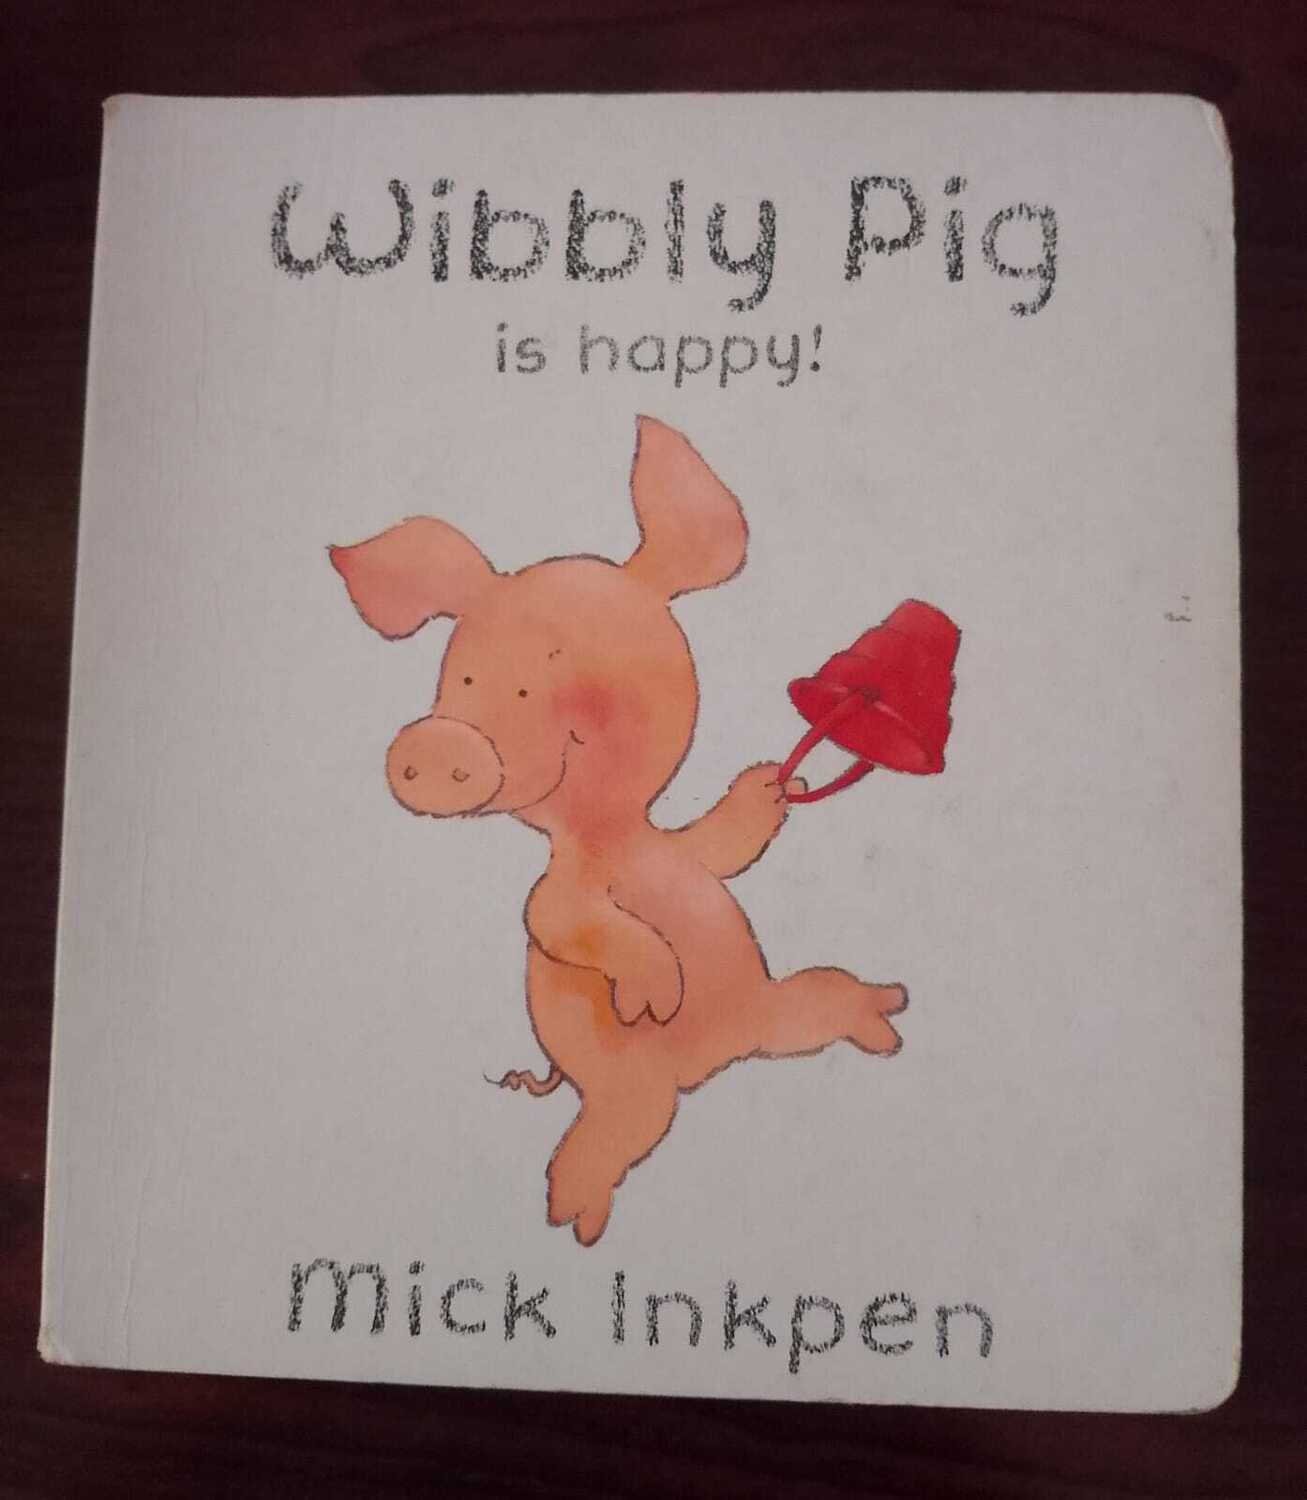 WIBBLY PIG IS HAPPY!